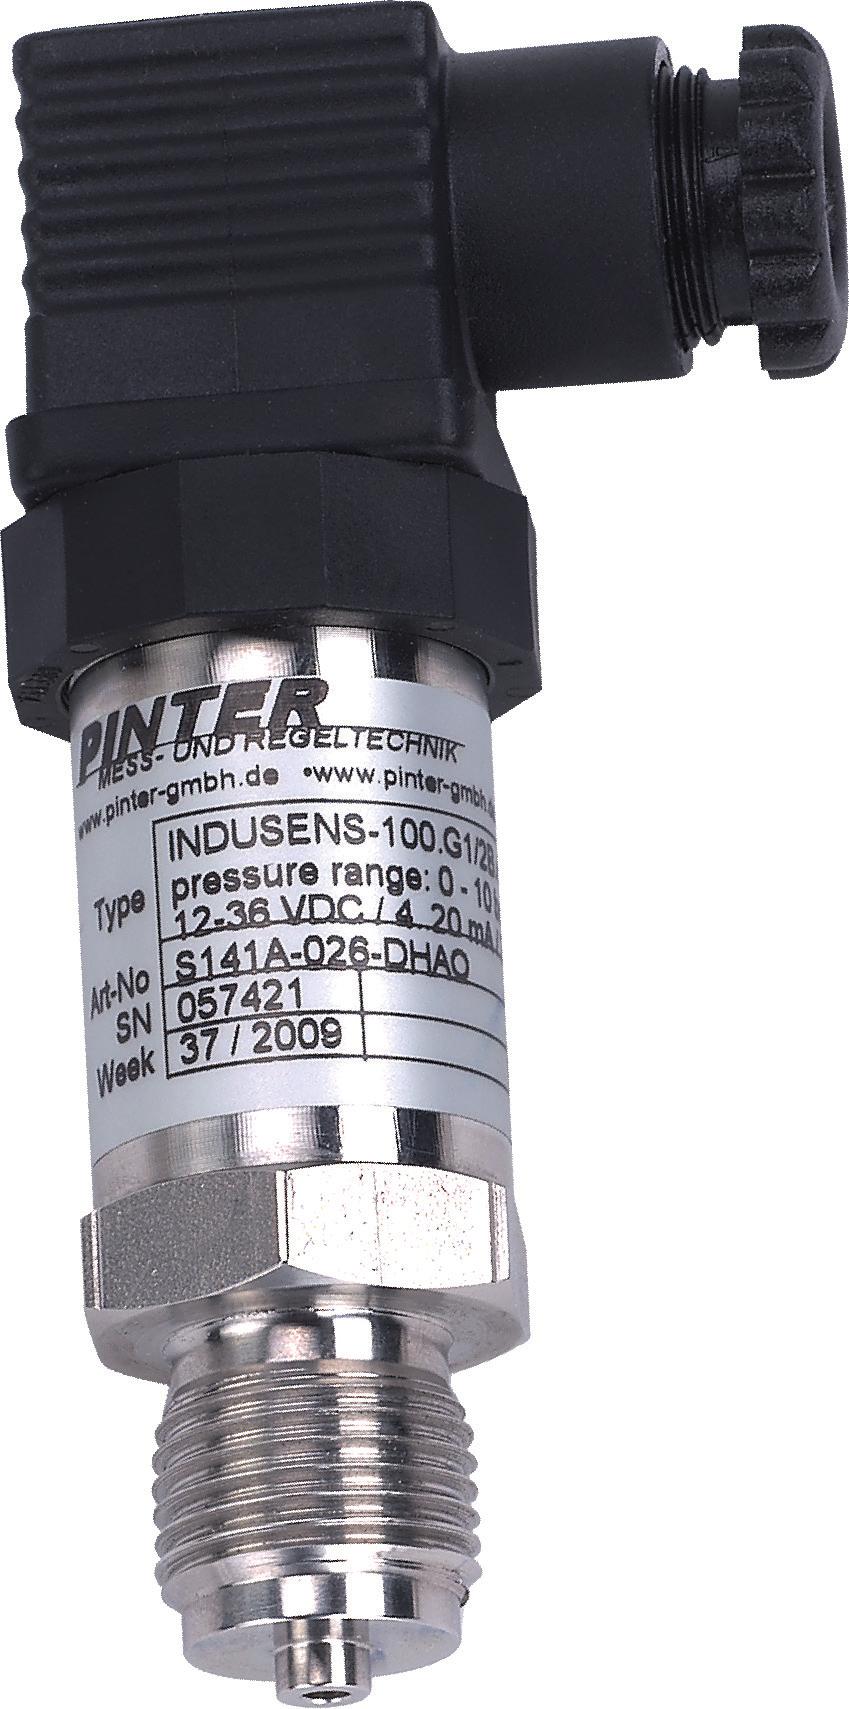 38 INDUSENS Pressure Transmitter Model 502 excellent price/performance ratio million times proven stainless steel sensor pressure ranges from 0-60 bar up to 0-600 bar relative pressure output signal